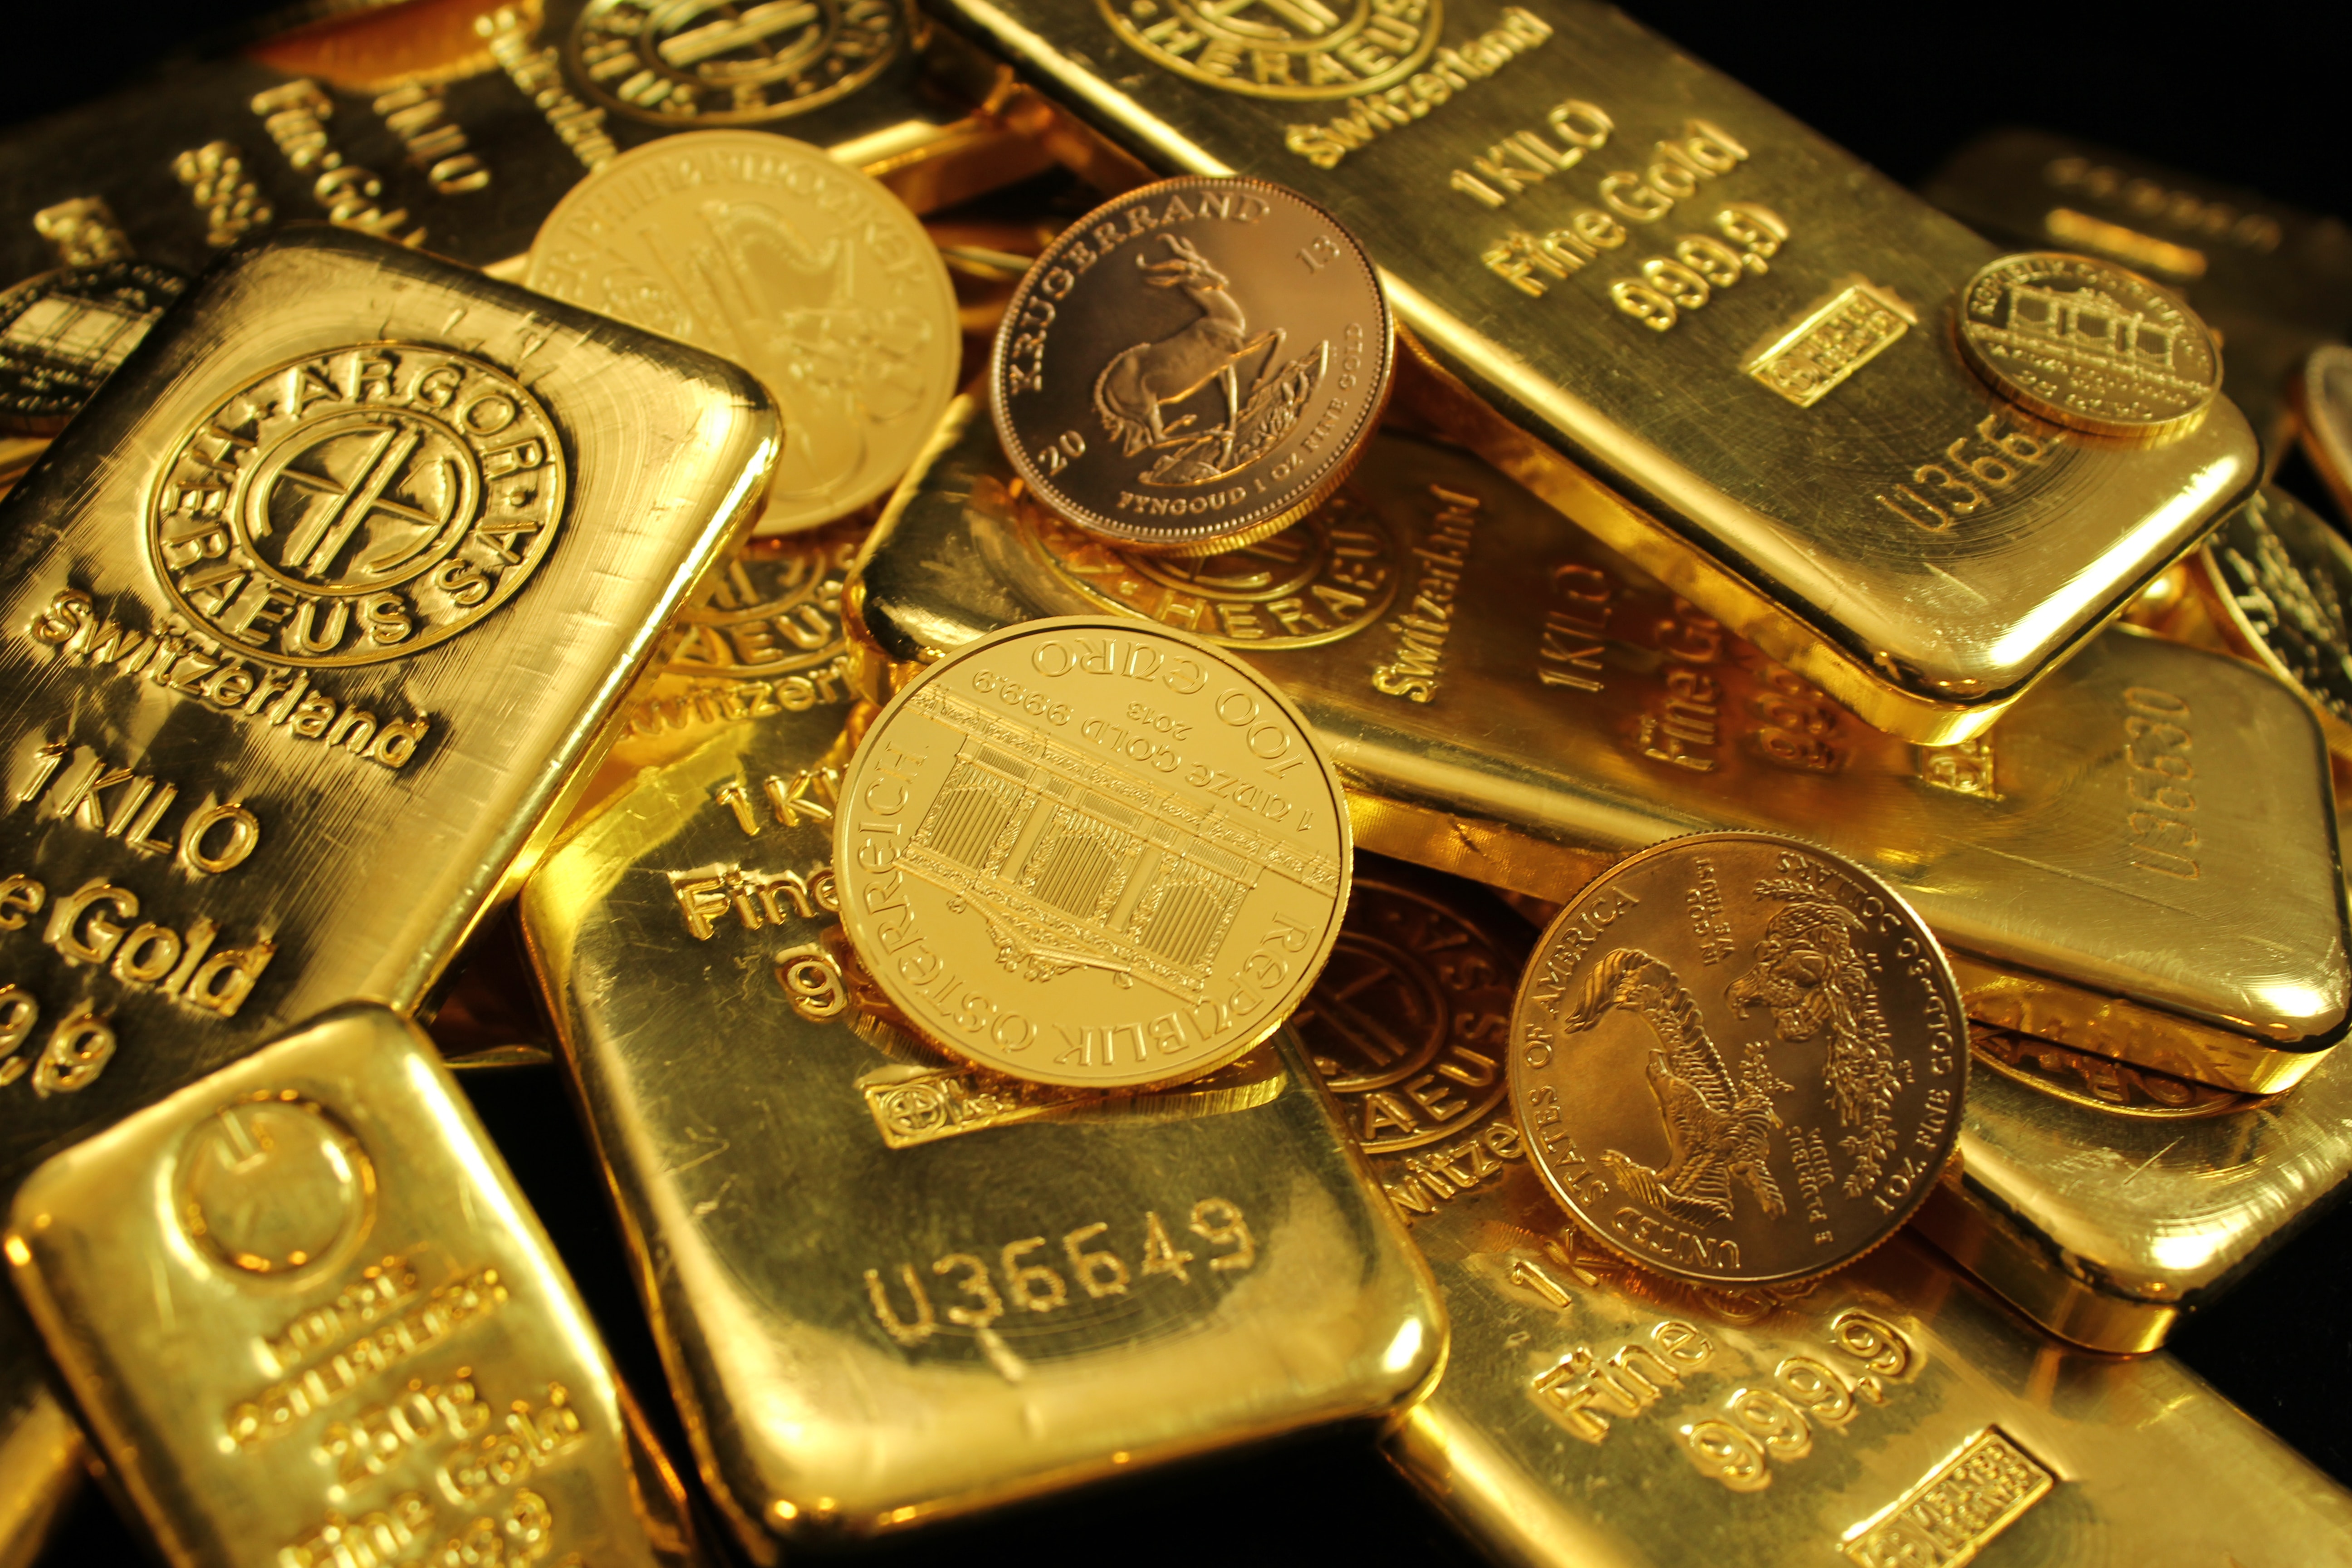 Gold-Plated Futures Navigating The Conversion Of Your IRA To Gold